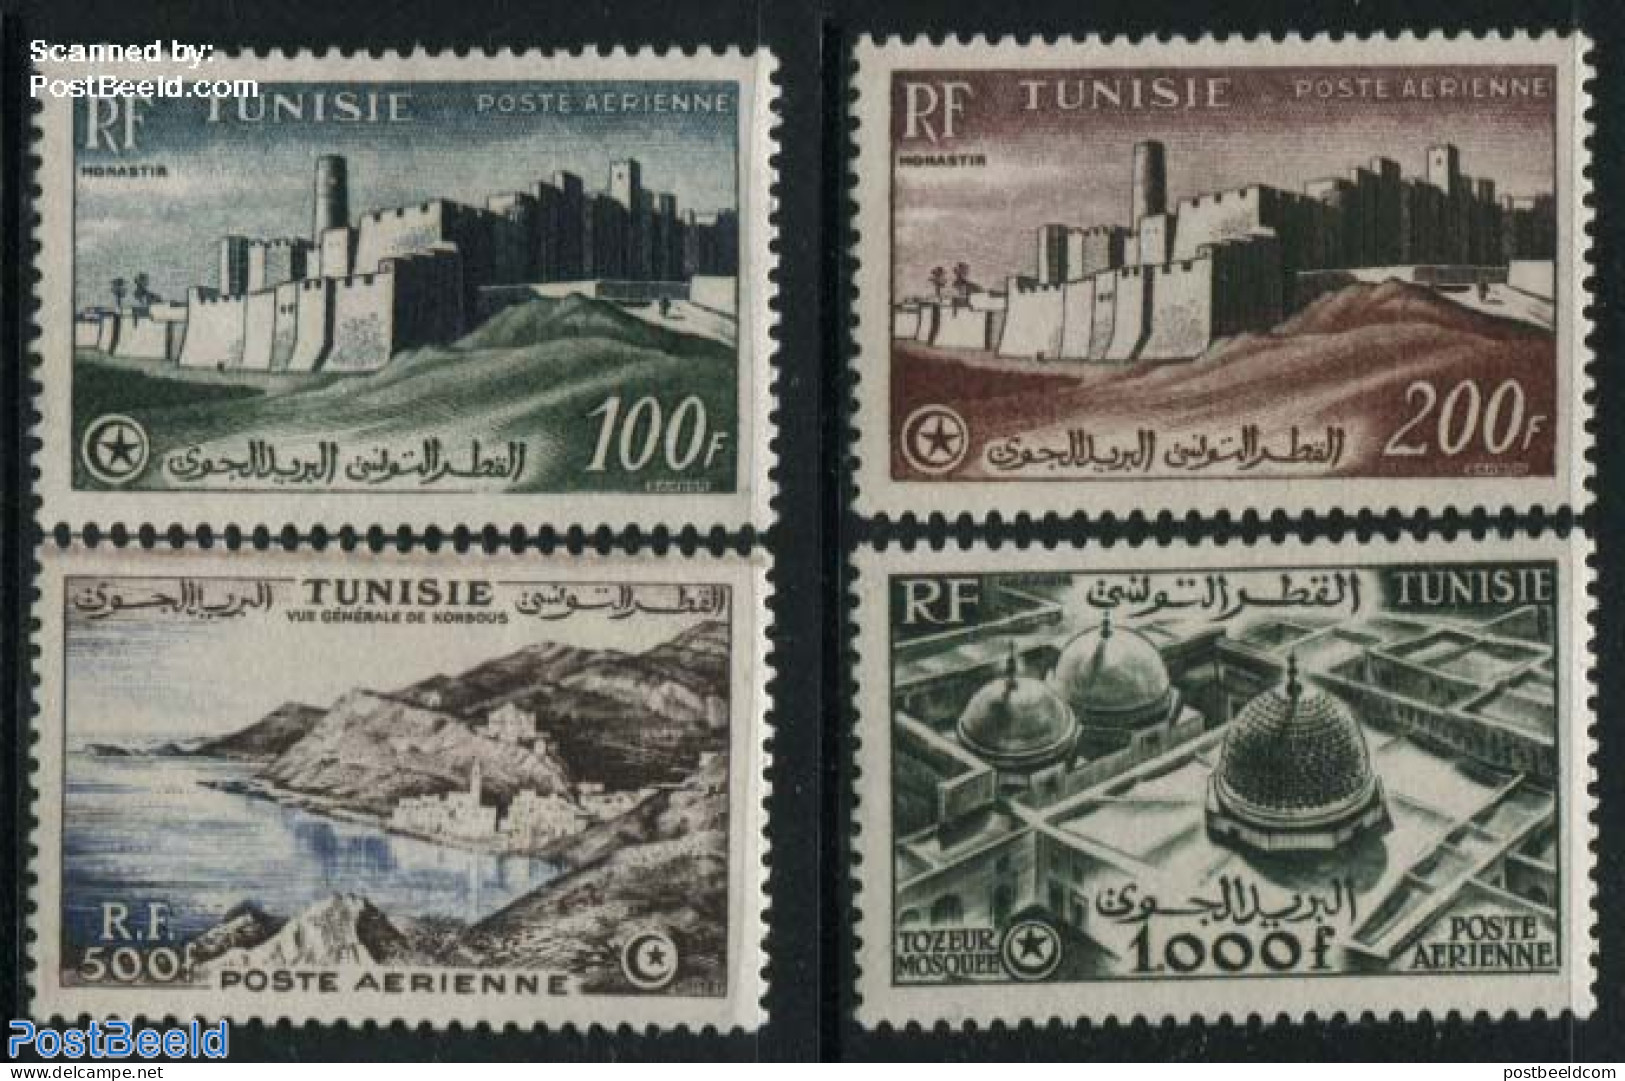 Tunisia 1953 Definitives 4v (with RF), Unused (hinged), Art - Castles & Fortifications - Kastelen